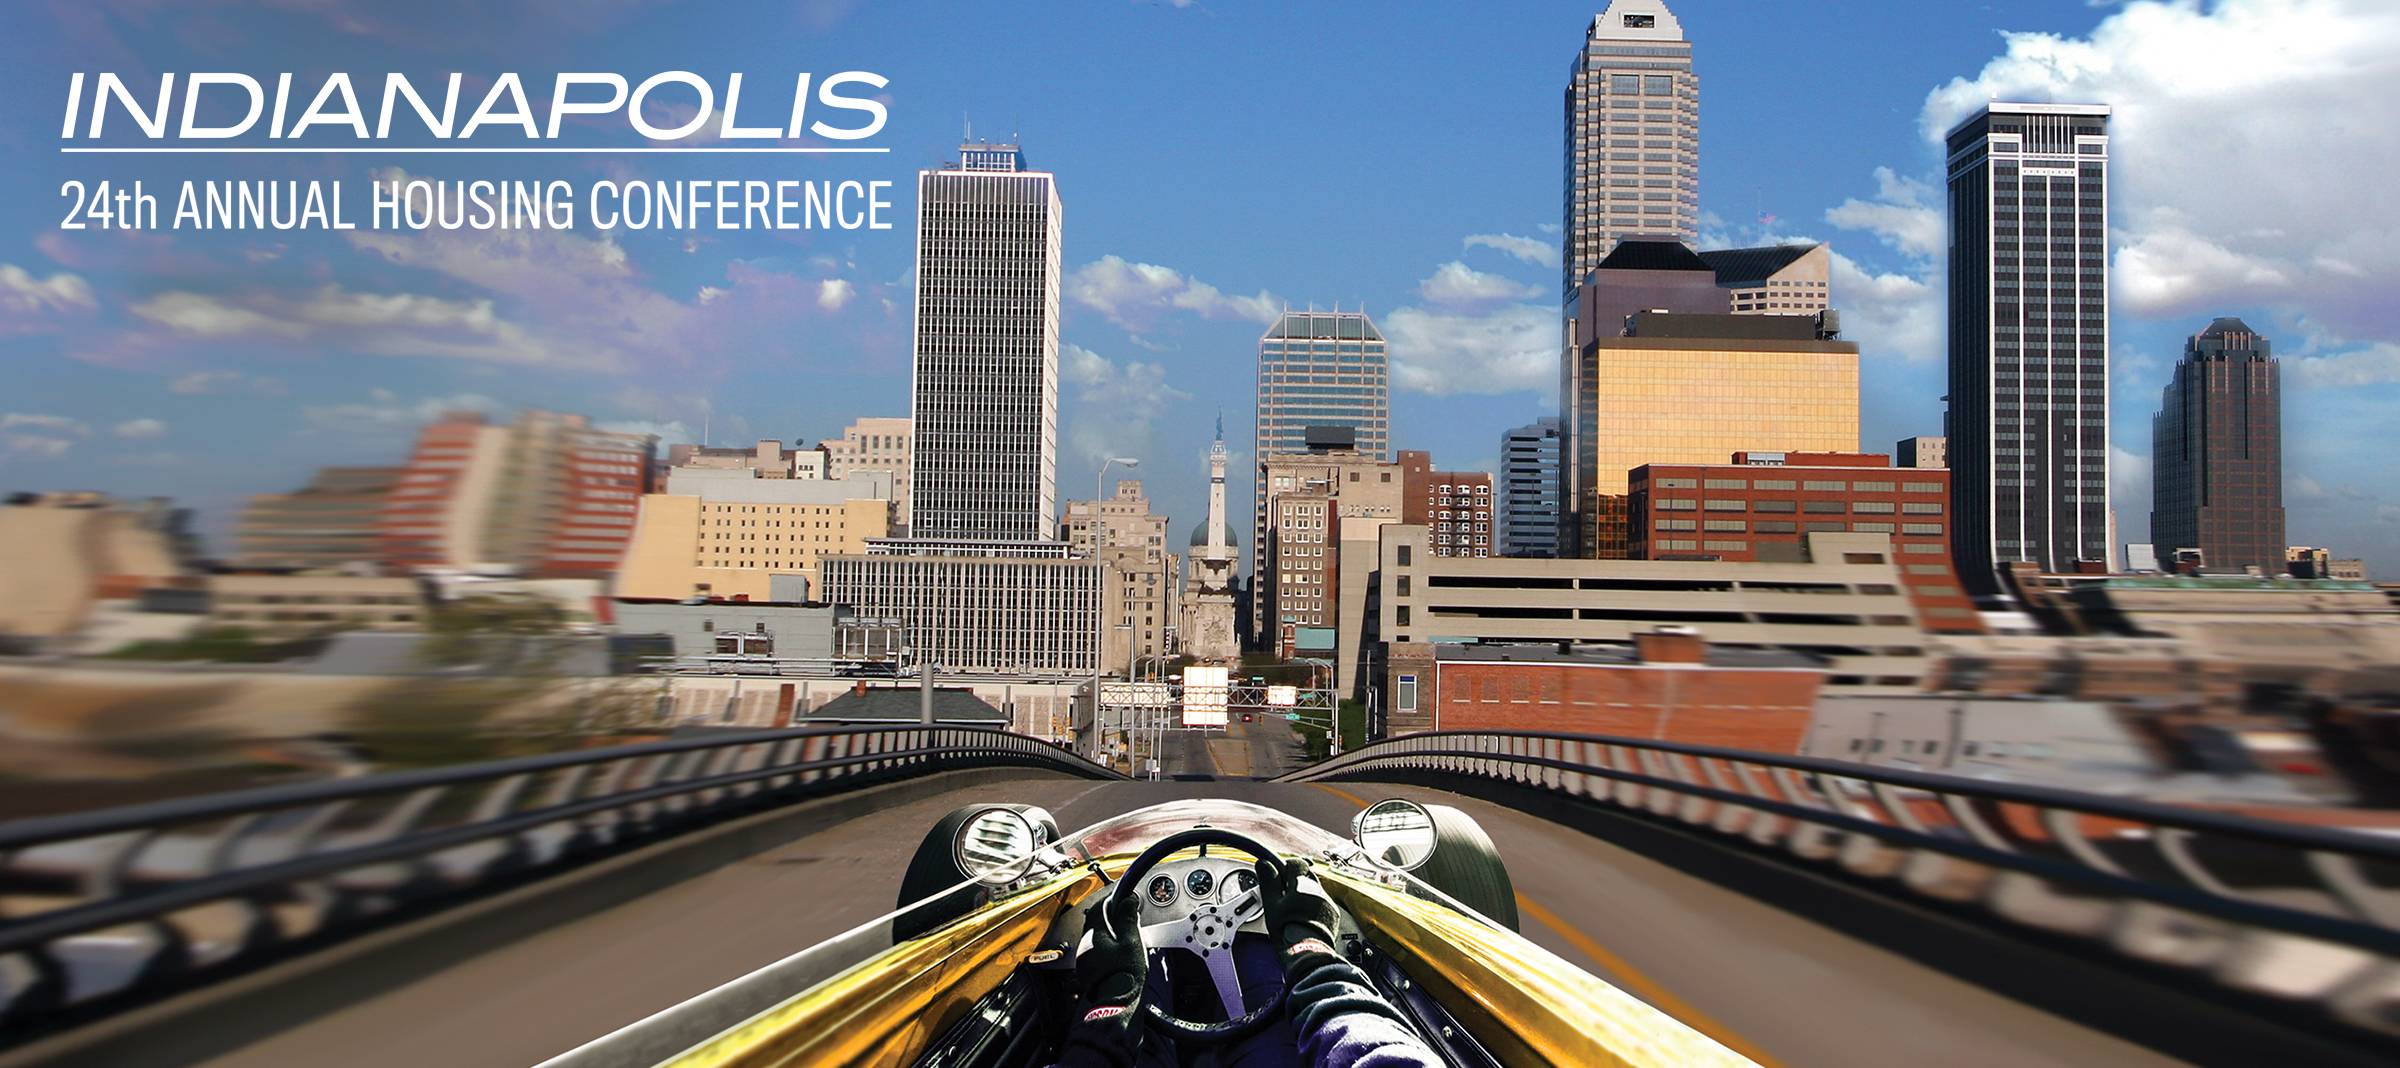 Image of conference banner, a race car in Downtown Indianapolis